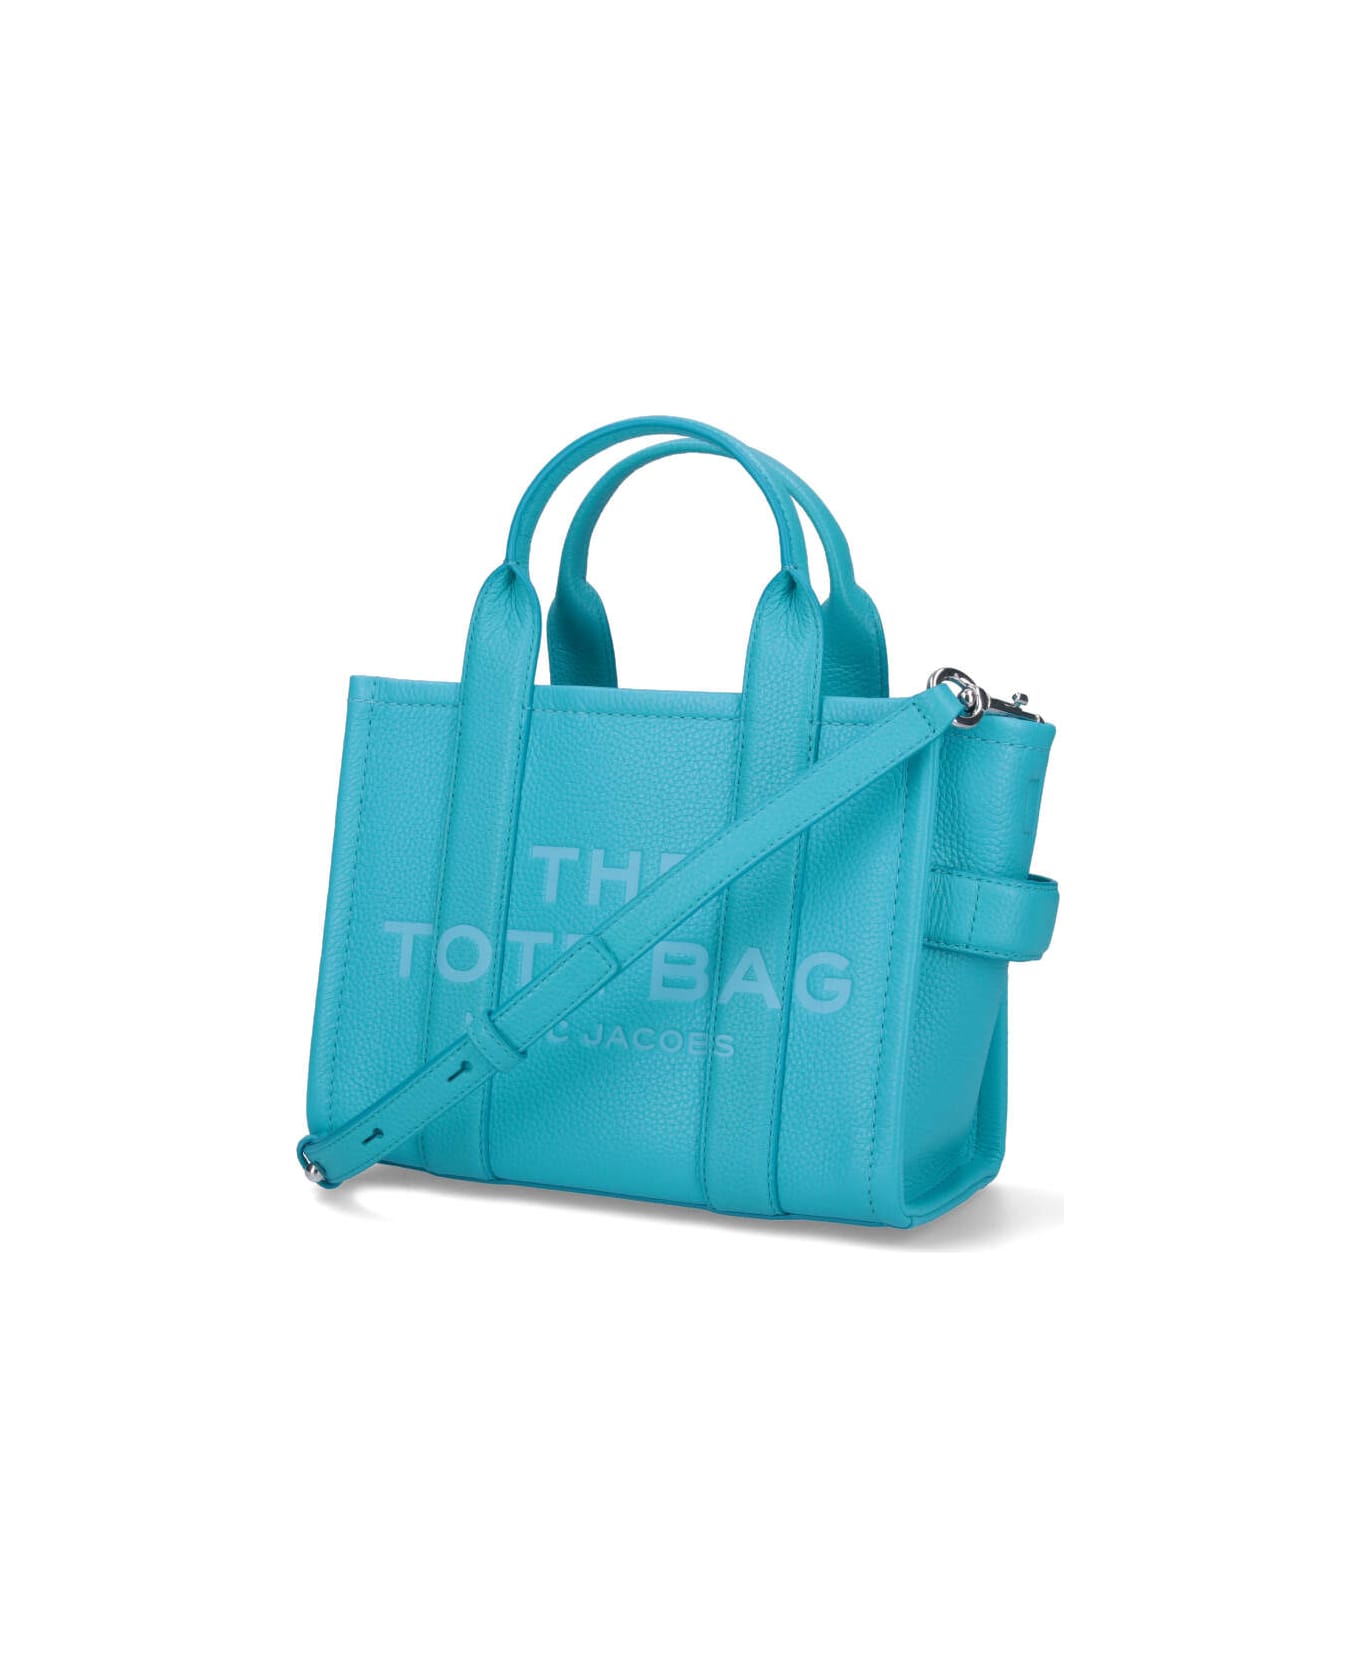 Marc Jacobs The Tote Bag - Light blue